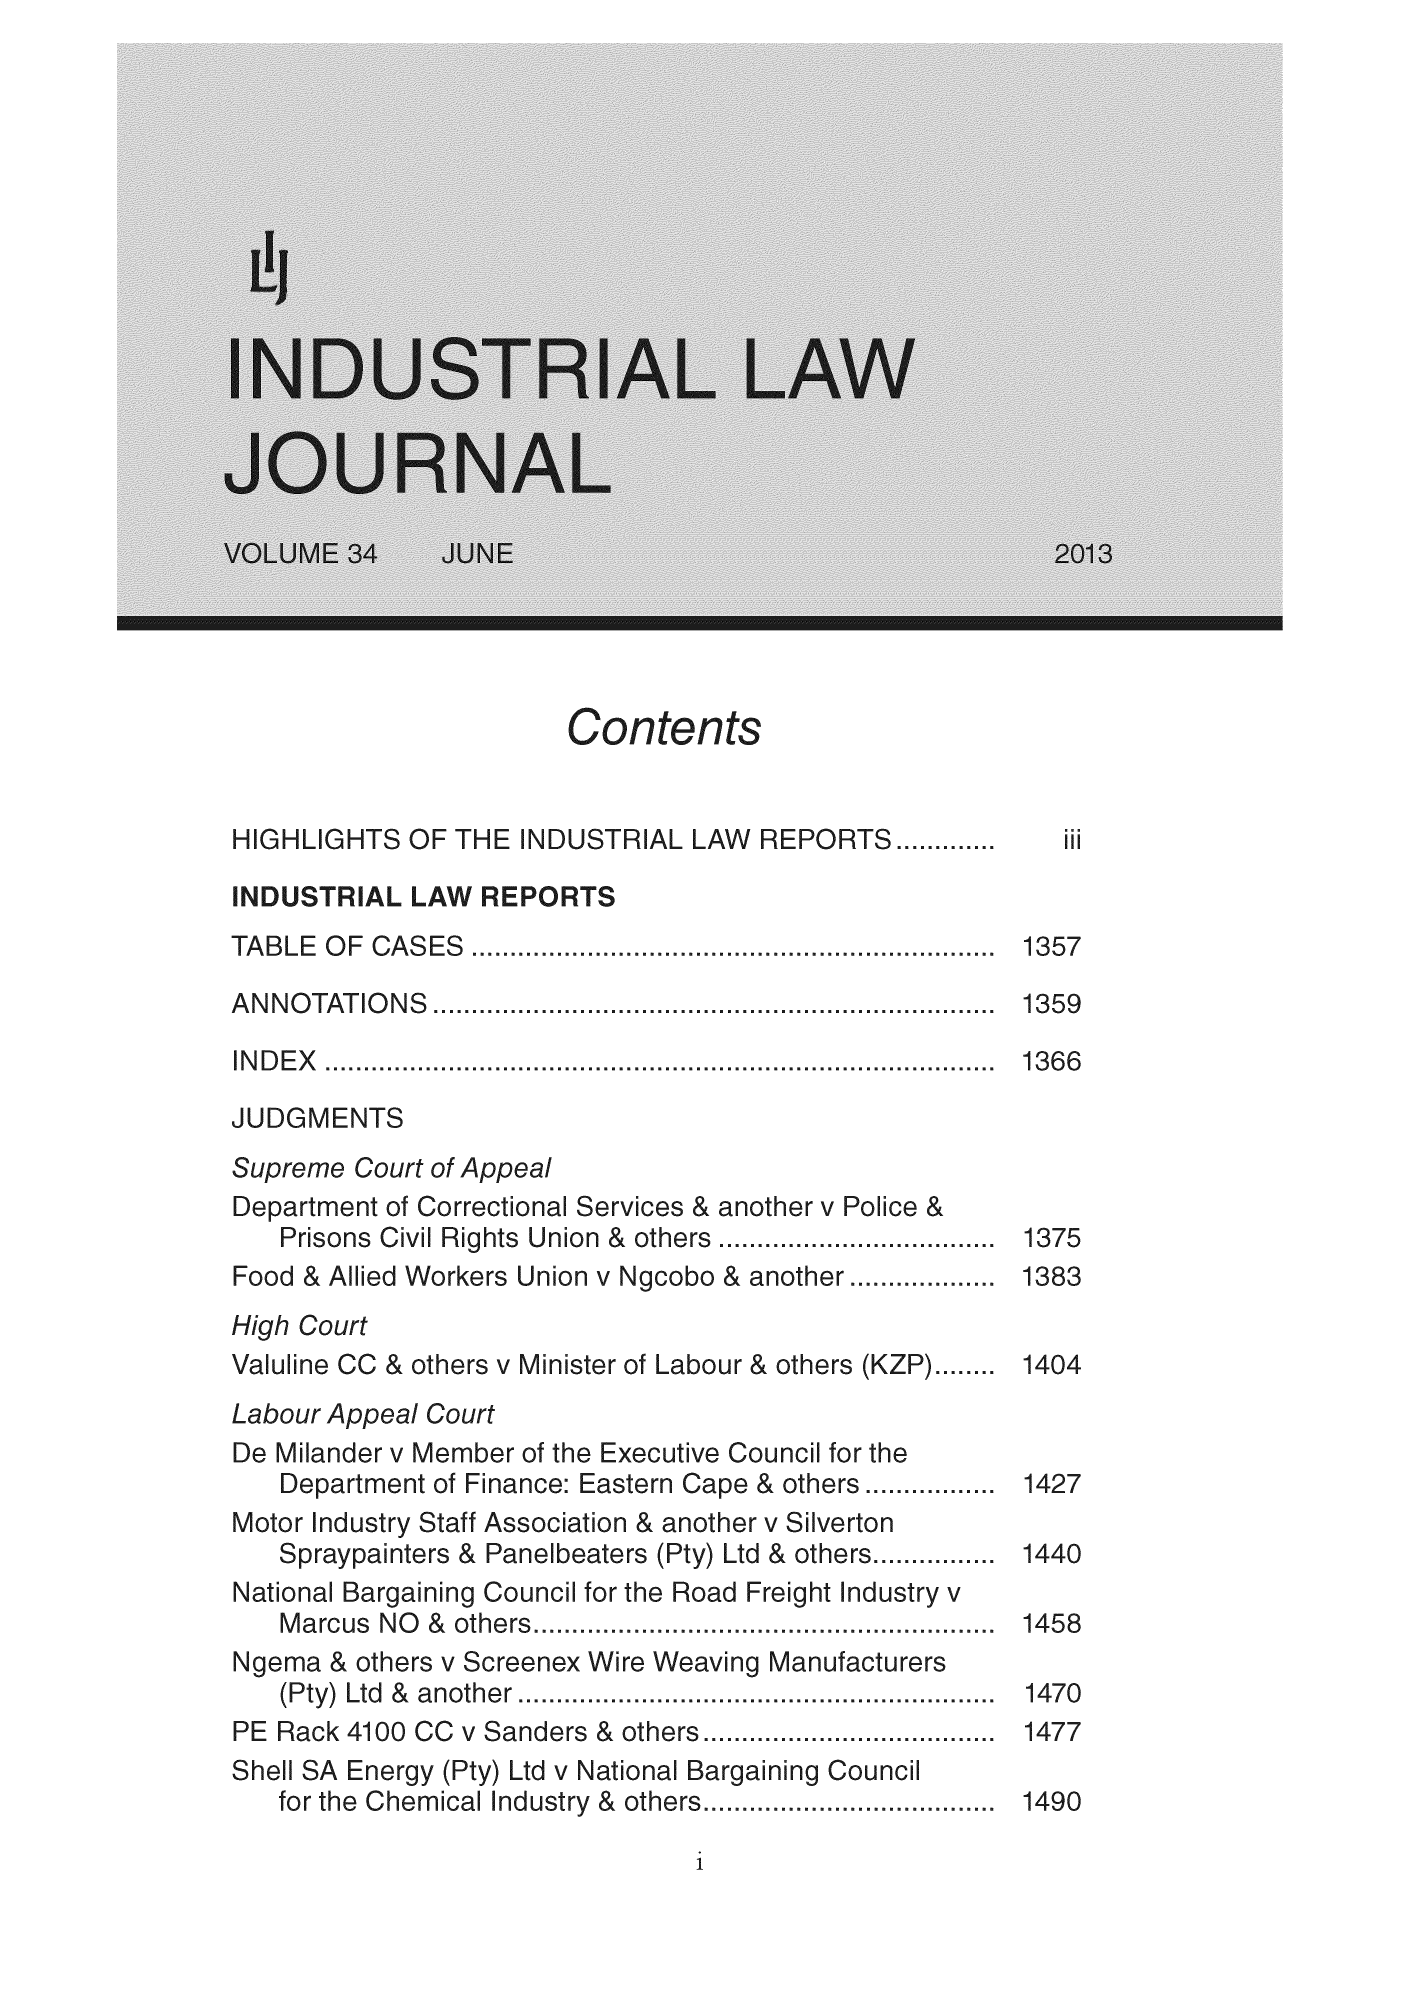 handle is hein.journals/iljuta37 and id is 1 raw text is: Contents

HIGHLIGHTS OF THE INDUSTRIAL LAW REPORTS .............  ii
INDUSTRIAL LAW REPORTS
TABLE  O F  CASES  ...........................................  135j
ANNOTATIONS                                 ..... 135
IN D E X  ............ . . . . . . . . . . . . . . . . .. . . . . . . . . . . . . . . . . . .....  13 6E
JUDGMENTS
Supreme Court of Appeal
Department of Correctional Services & another v Police &
Prisons  Civil Rights  Union  &  others ...........................  137%
Food & Allied Workers Union v Ngcobo & another  ..... 138
High Court
Valuline CC & others v Minister of Labour & others (KZP)........ 140
Labour Appeal Court
De Milander v Member of the Executive Council for the
Department of Finance: Eastern Cape & others .................  142
Motor Industry Staff Association & another v Silverton
Spraypainters &  Panelbeaters (Pty) Ltd & others................  144(
National Bargaining Council for the Road Freight Industry v
Marcus NO & others....... 145
Ngema & others v Screenex Wire Weaving Manufacturers
Pty  Ltd &  another                   ...........  147(
PE Rack 4100 CC v Sanders & others          ..... 147
Shell SA Energy (Pty) Ltd v National Bargaining Council
for the  Chemical Industry &  others.....................  149(


